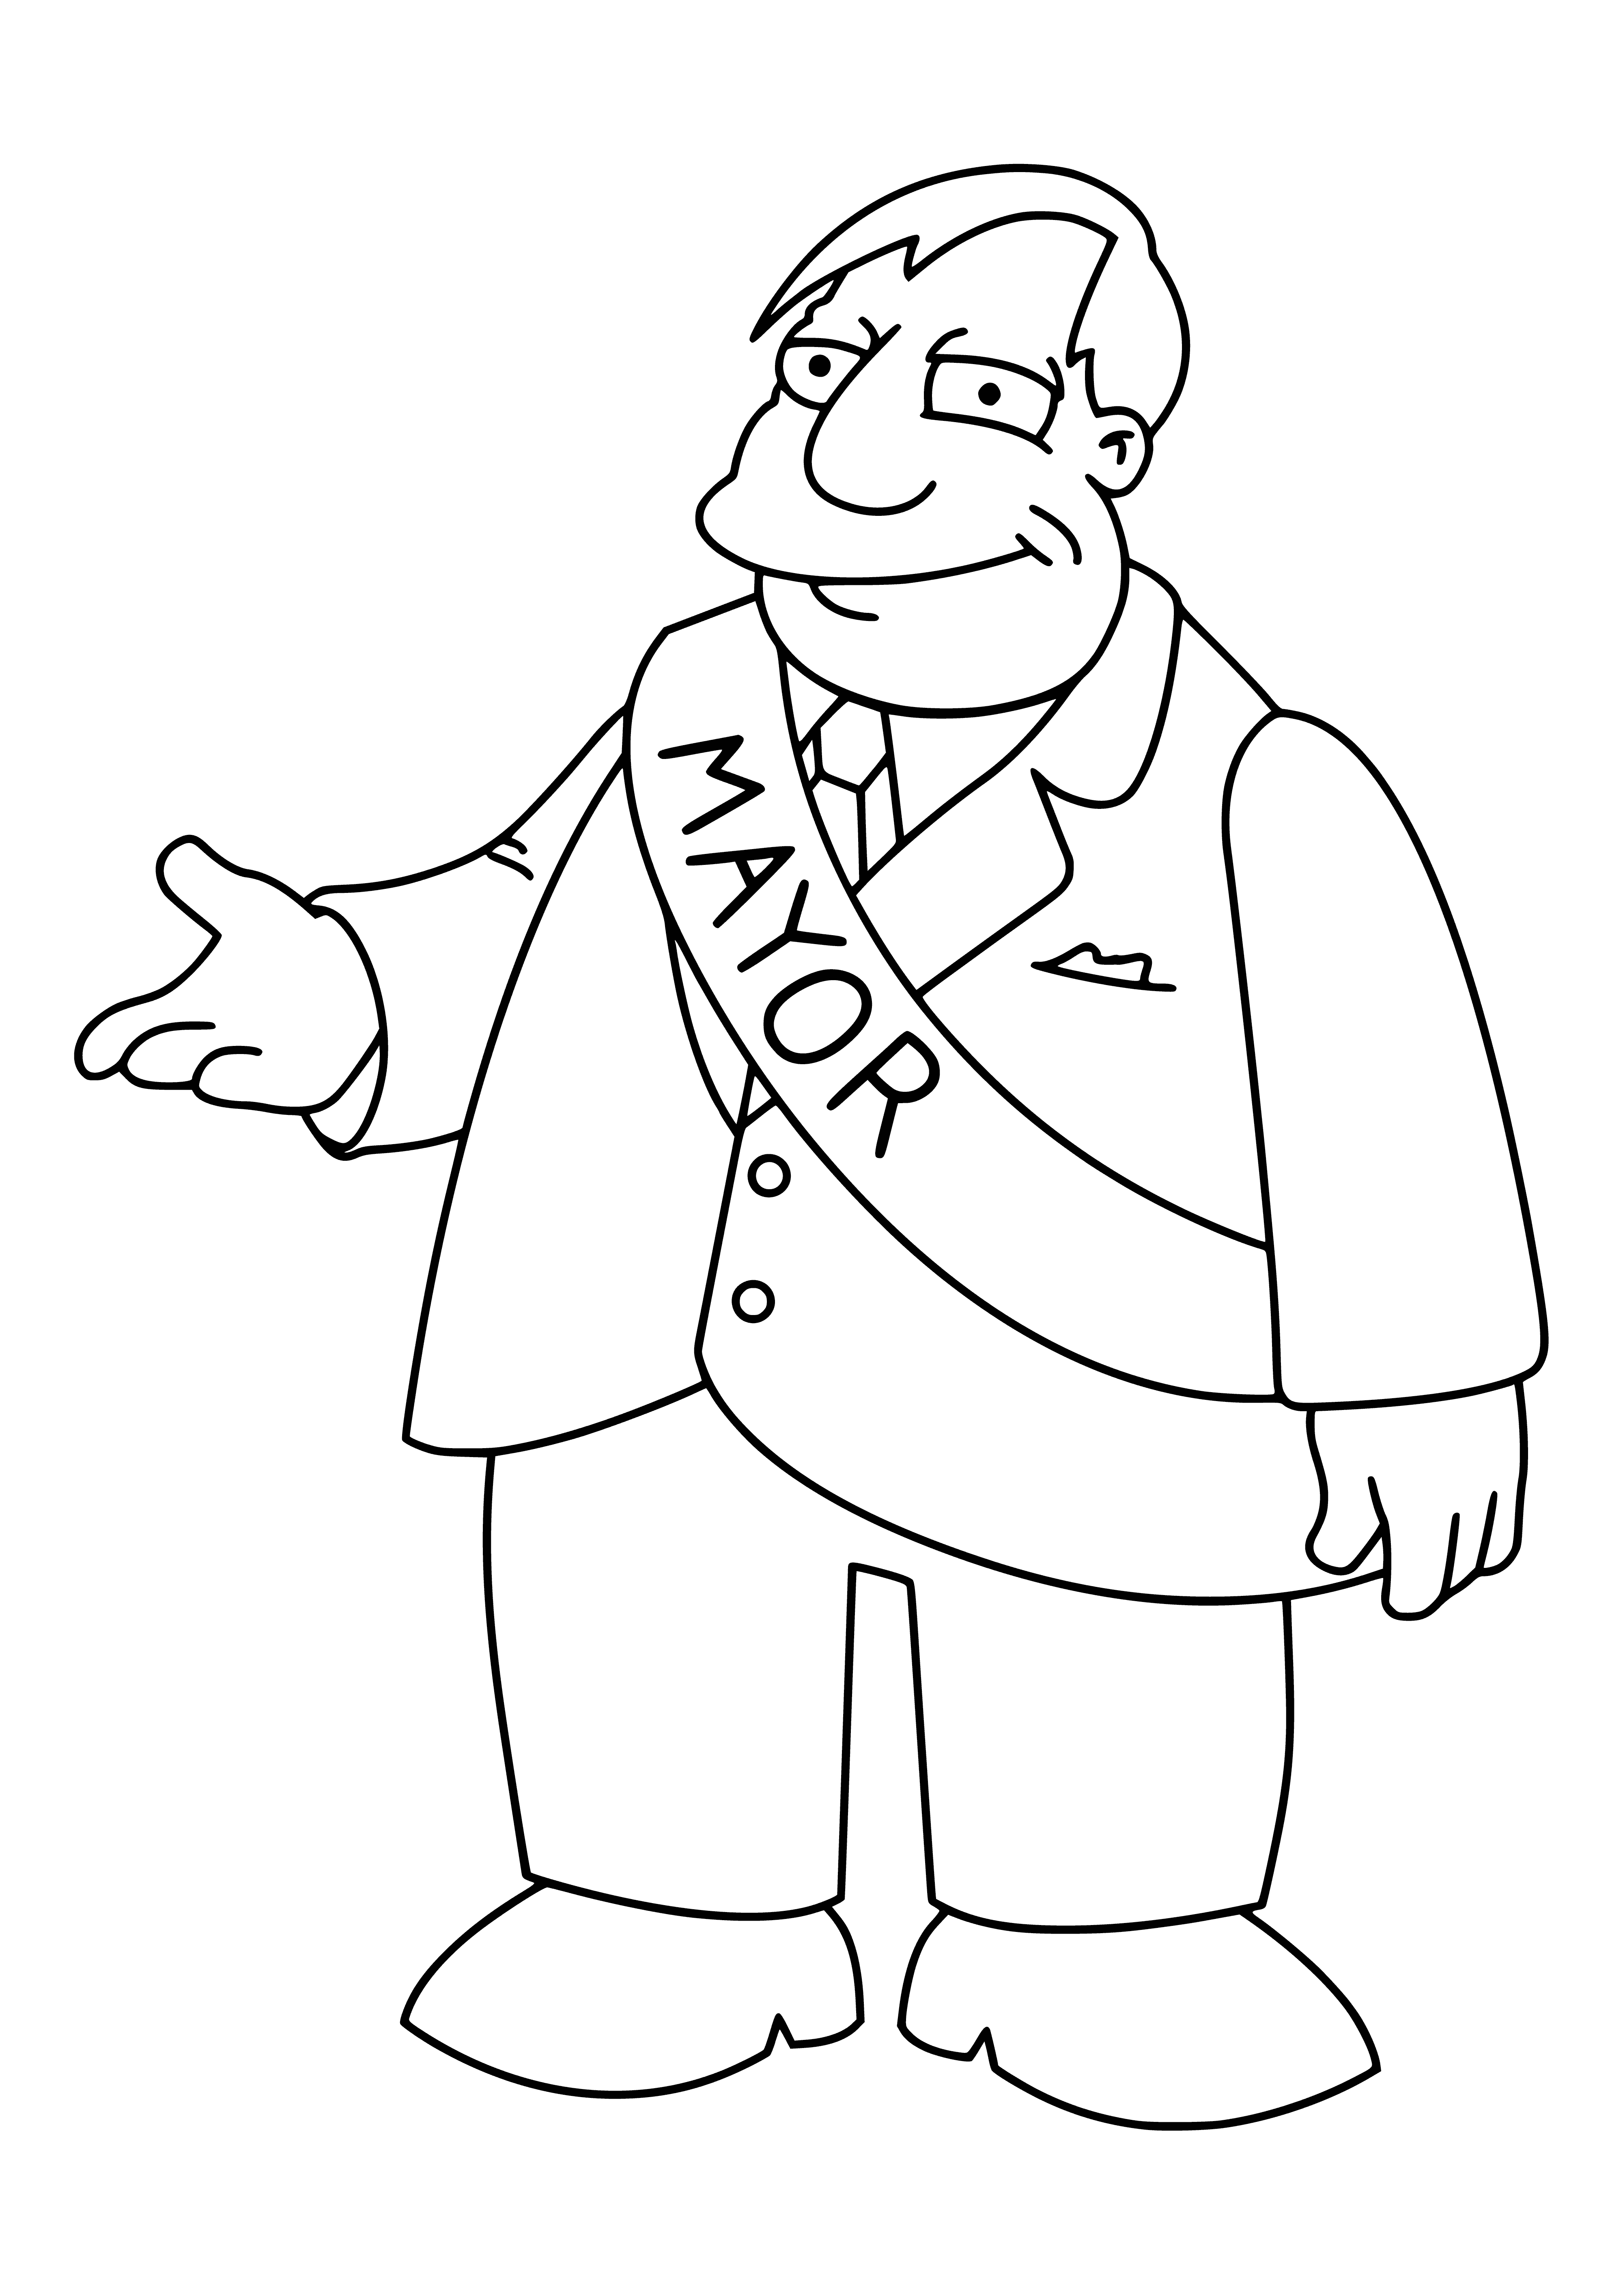 Mayor of Springfeed - Quimby coloring page